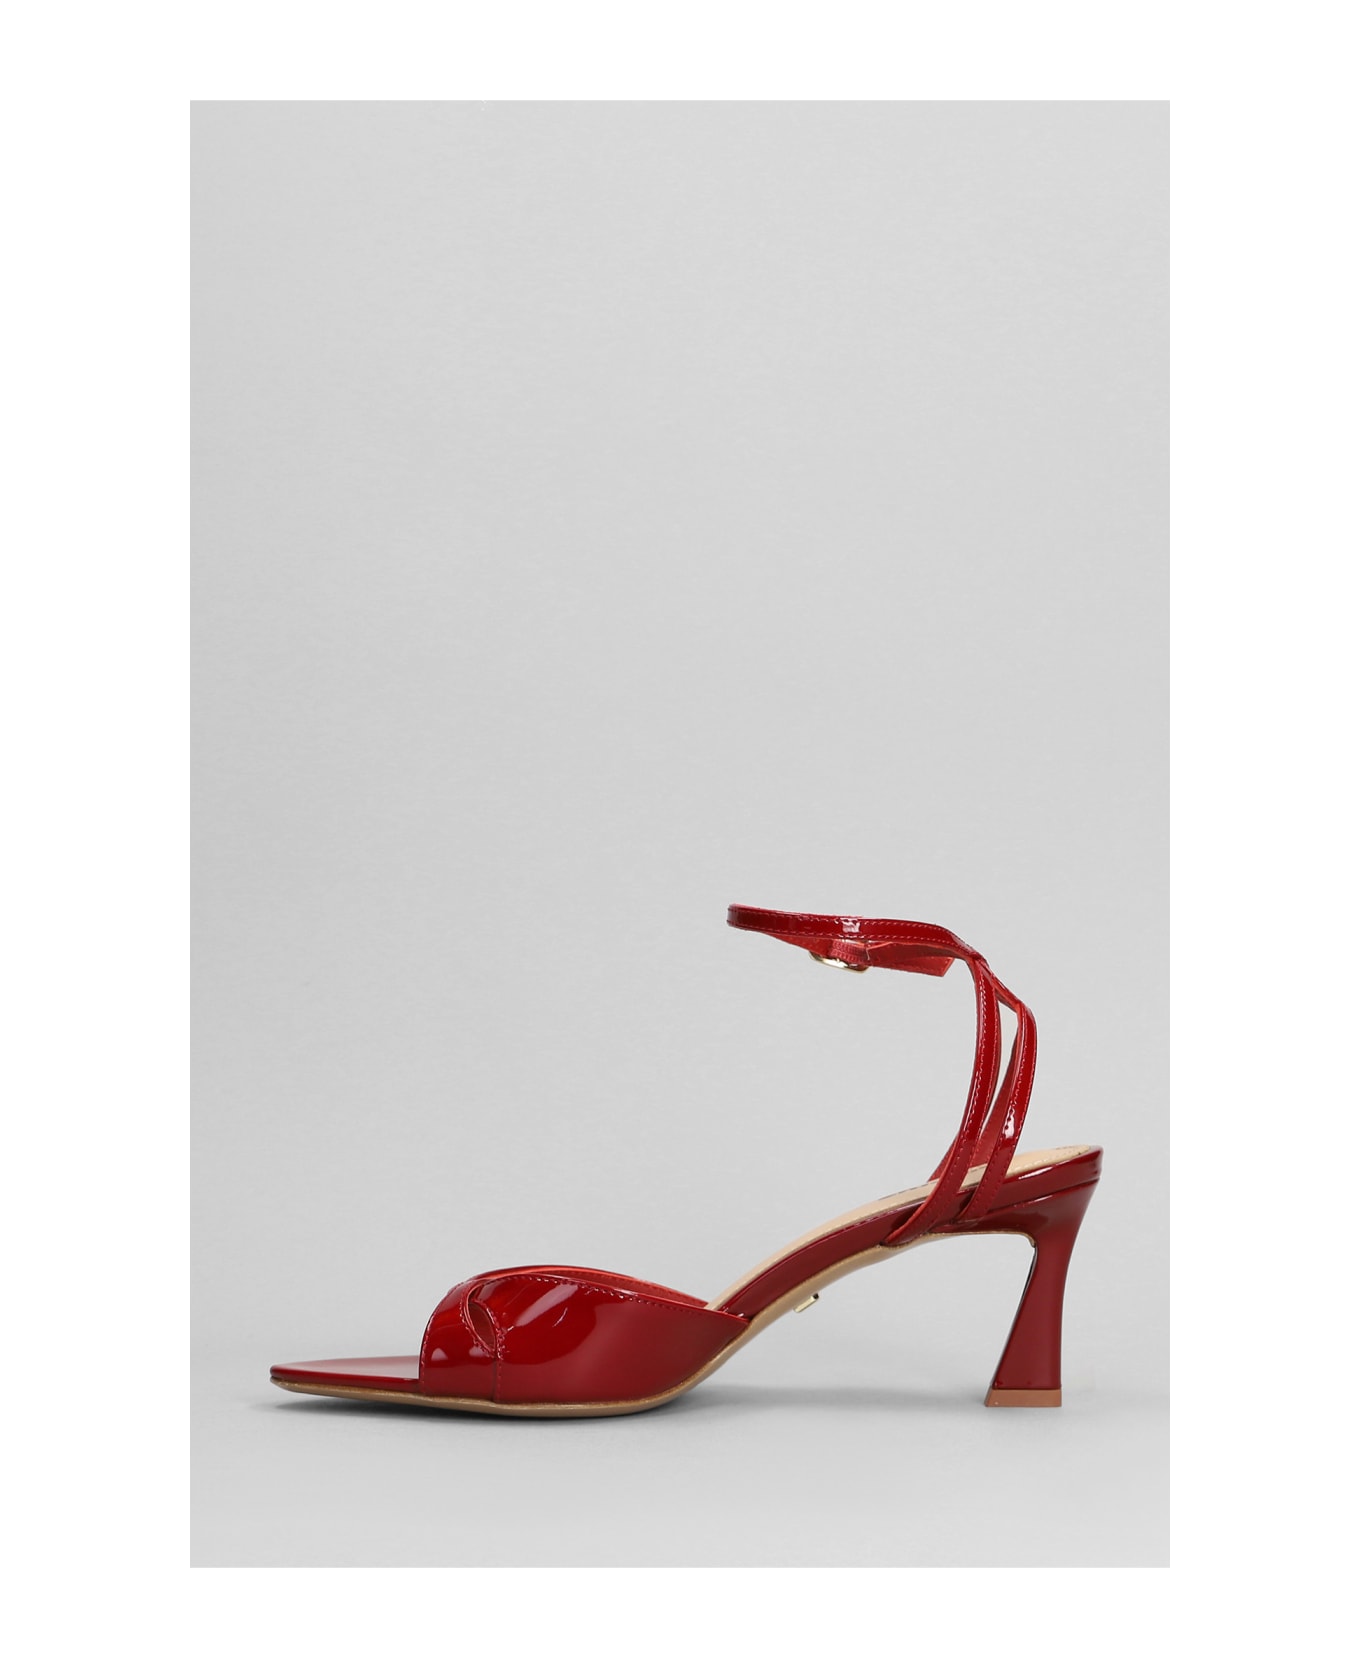 Lola Cruz Bianca 65 Sandals In Red Patent Leather - red サンダル